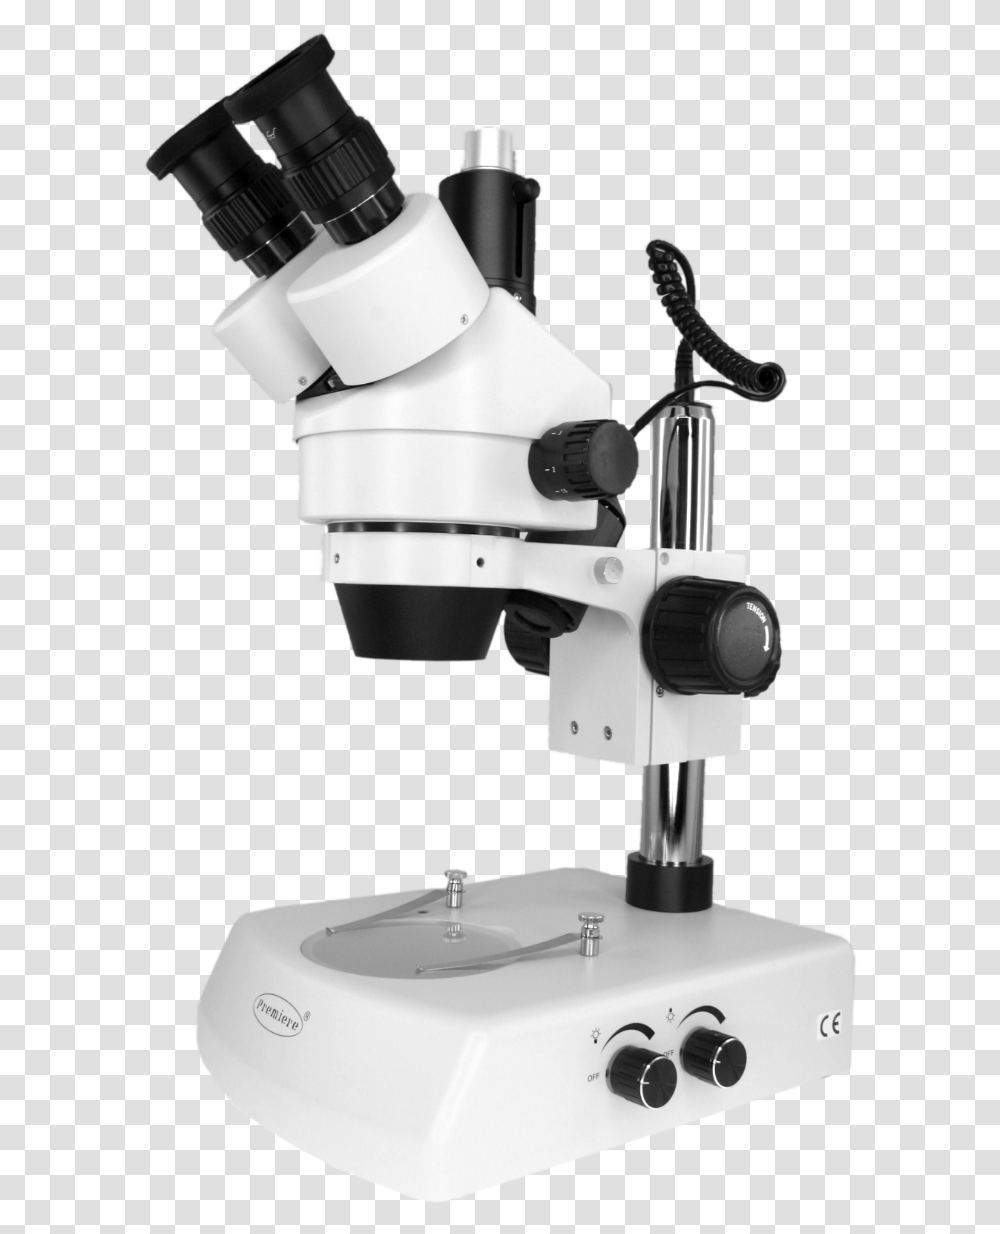 Microscope Images, Sink Faucet Transparent Png